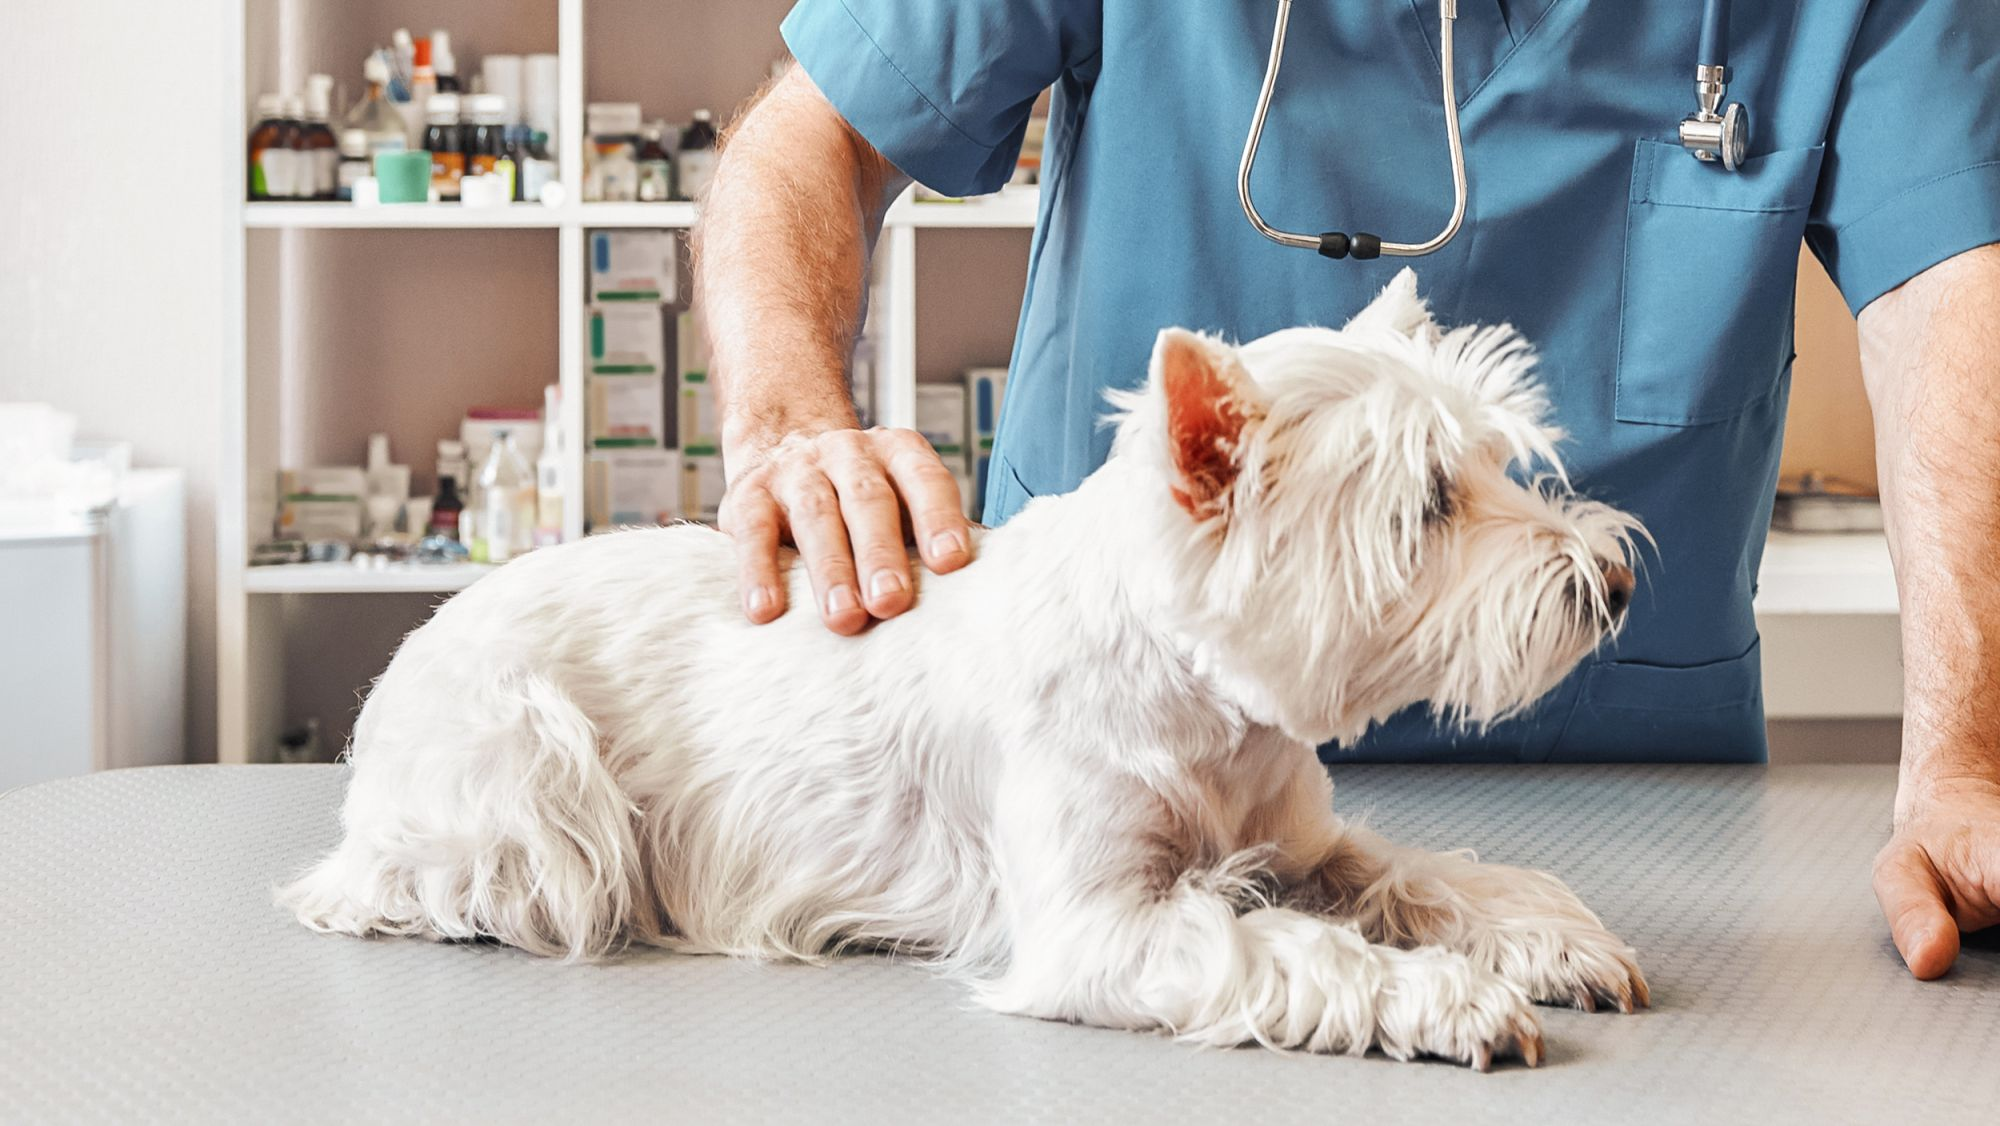 West Highland White Terrier lying down on an examination table being examined by a vet.